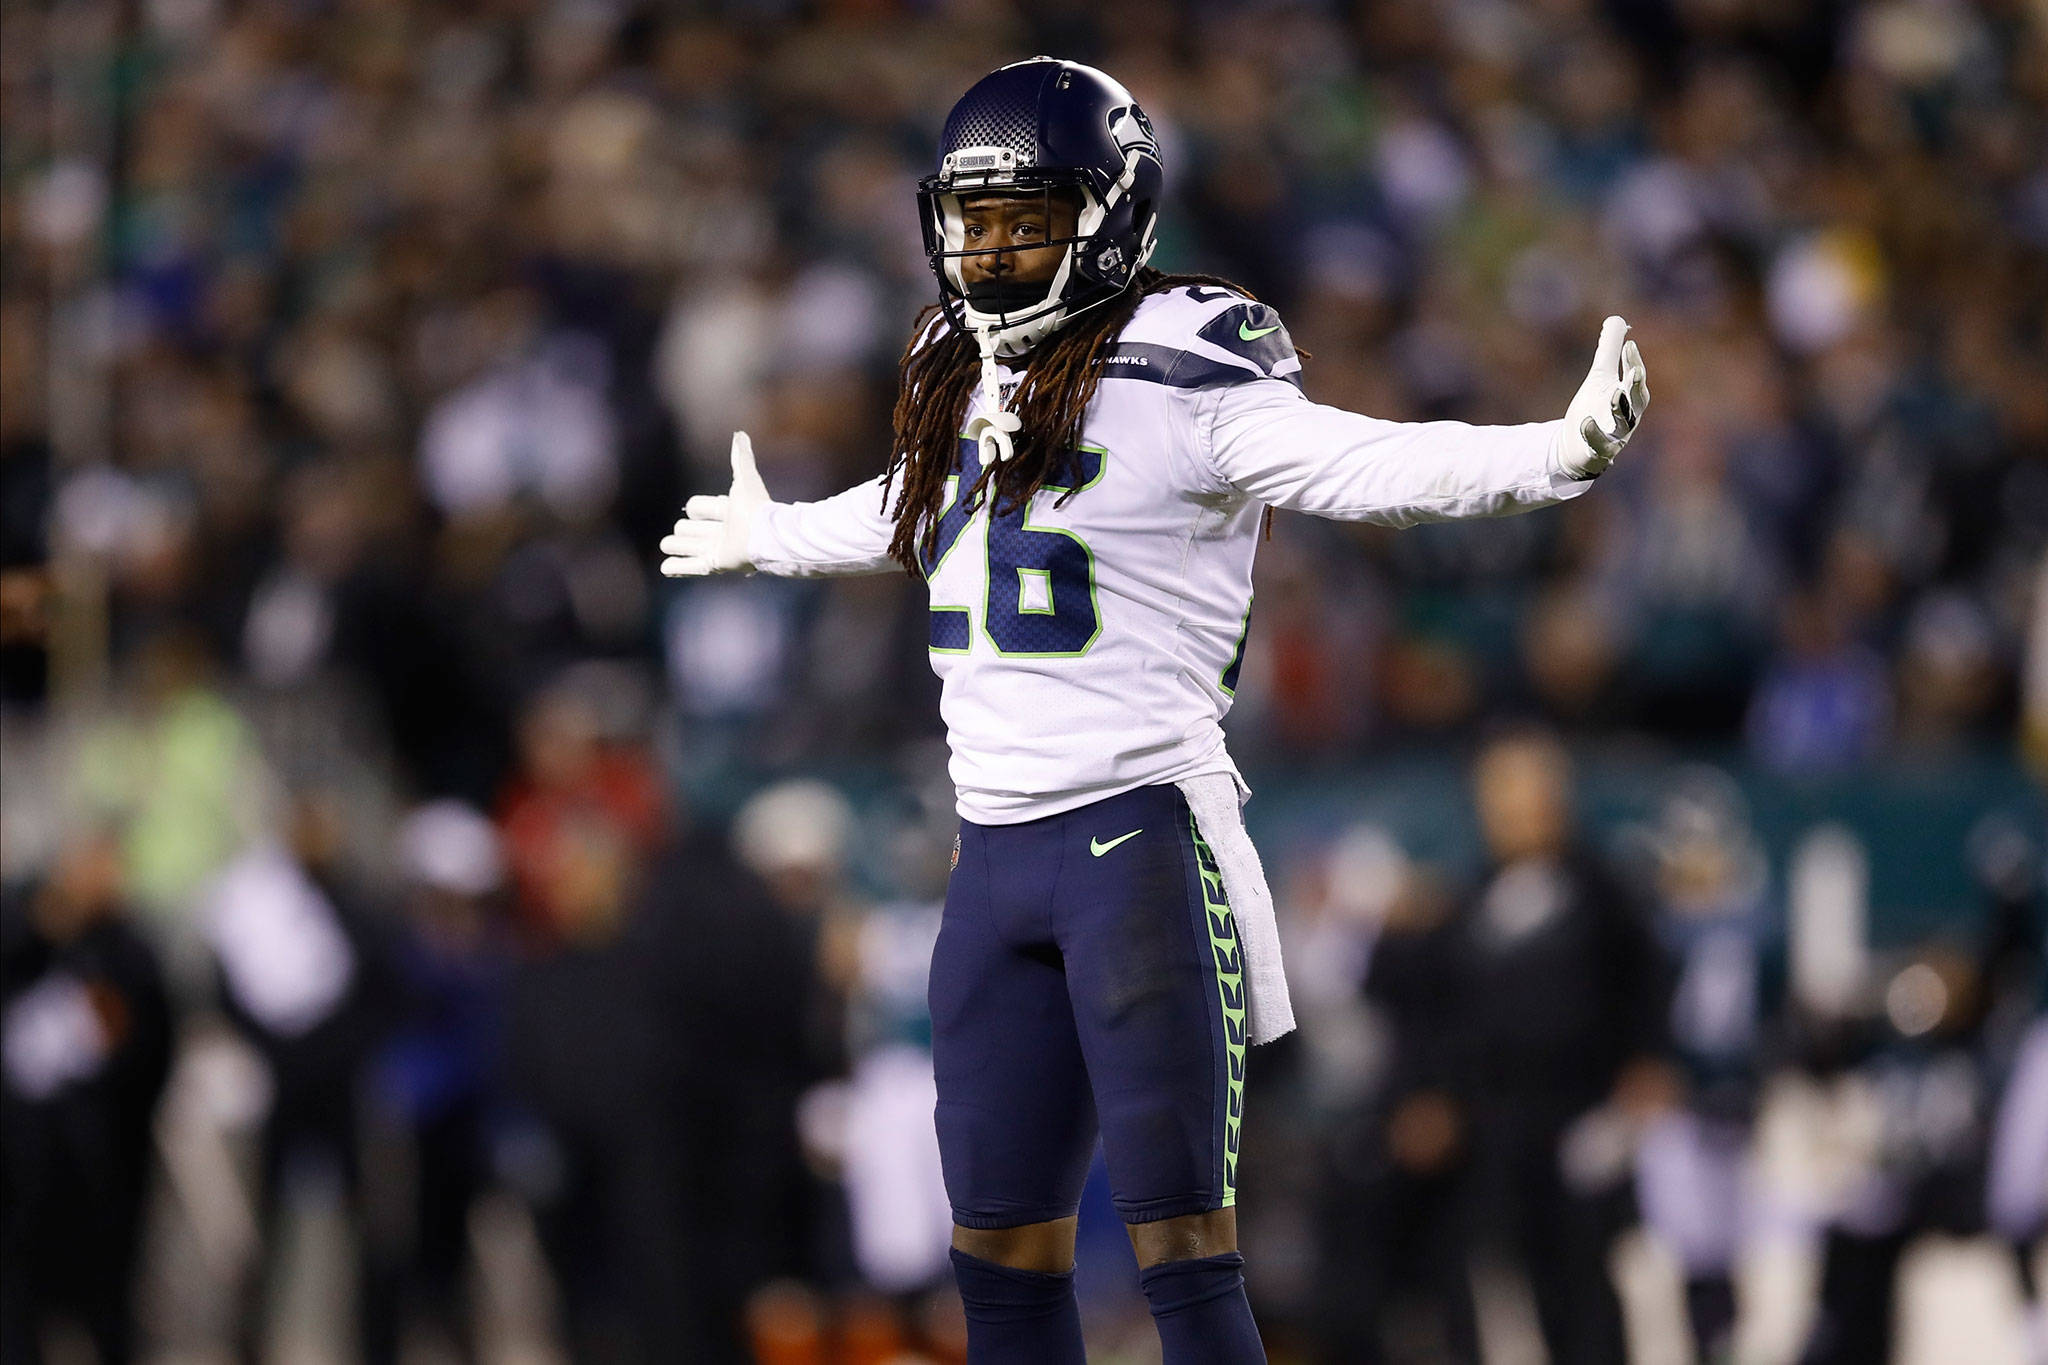 Seahawks cornerback Shaquill Griffin reacts during the second half of a wild-card playoff game against the Eagles on Jan. 5, 2020, in Philadelphia. (AP Photo/Matt Rourke)